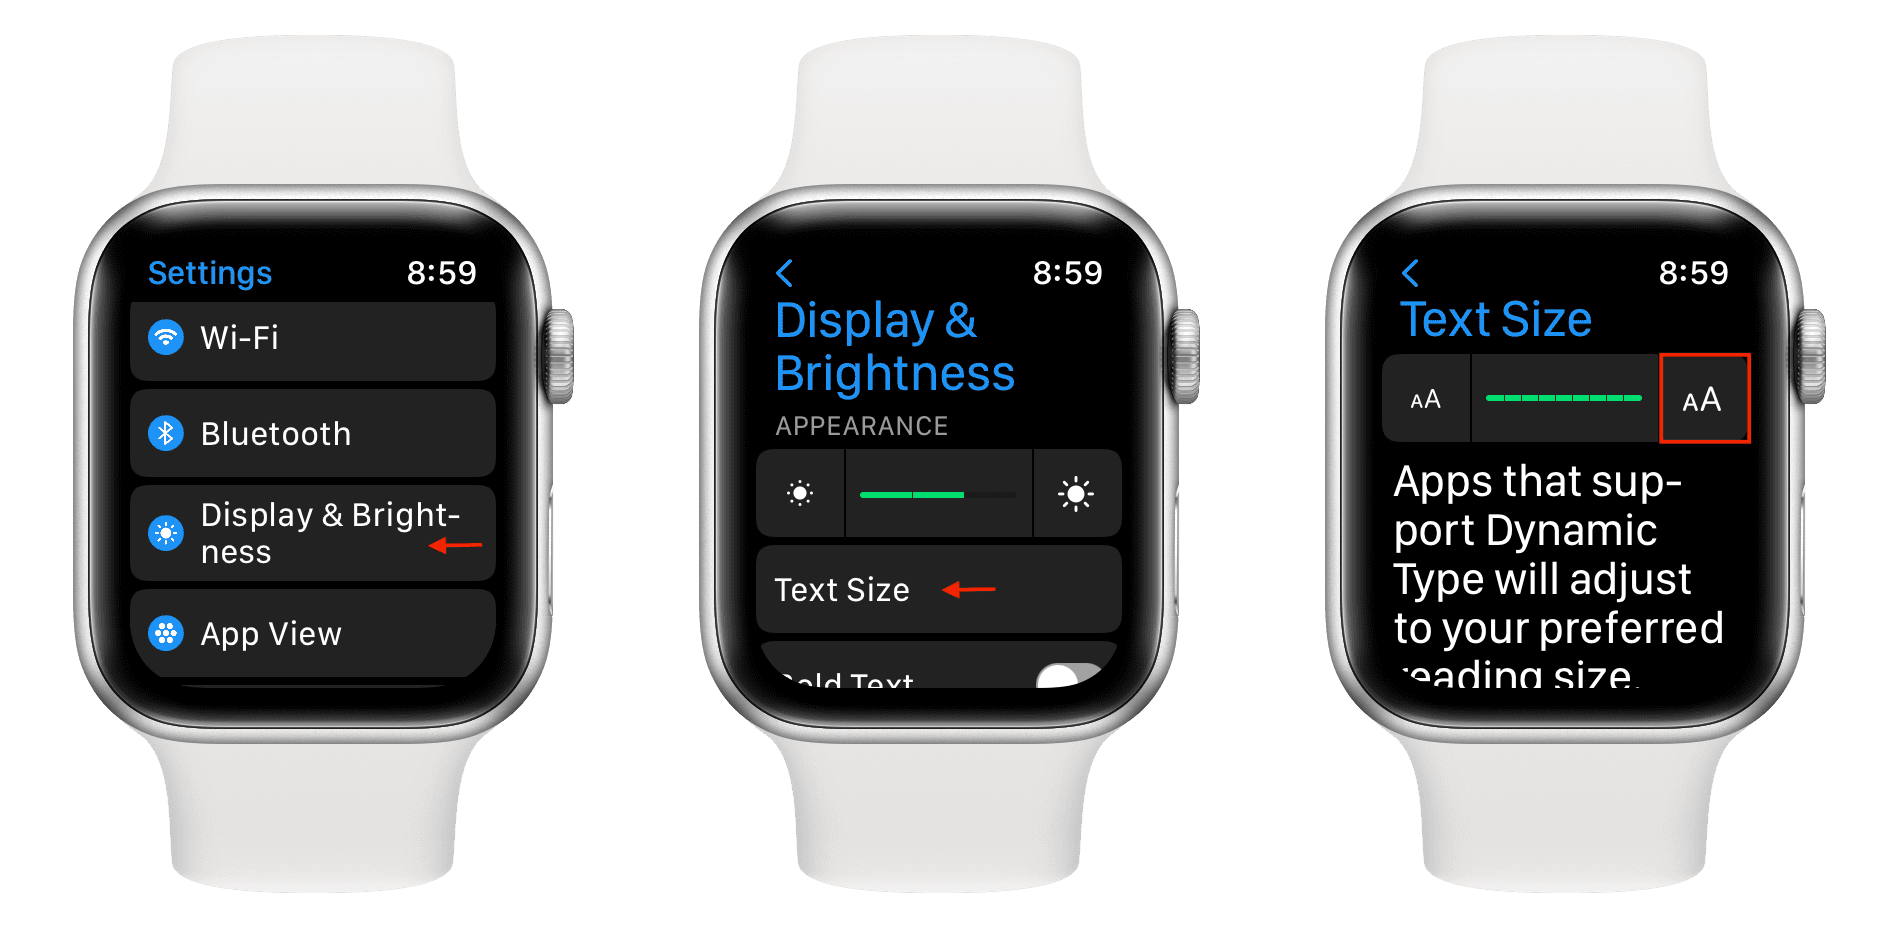 Increase Apple Watch text size from Display and Brightness settings